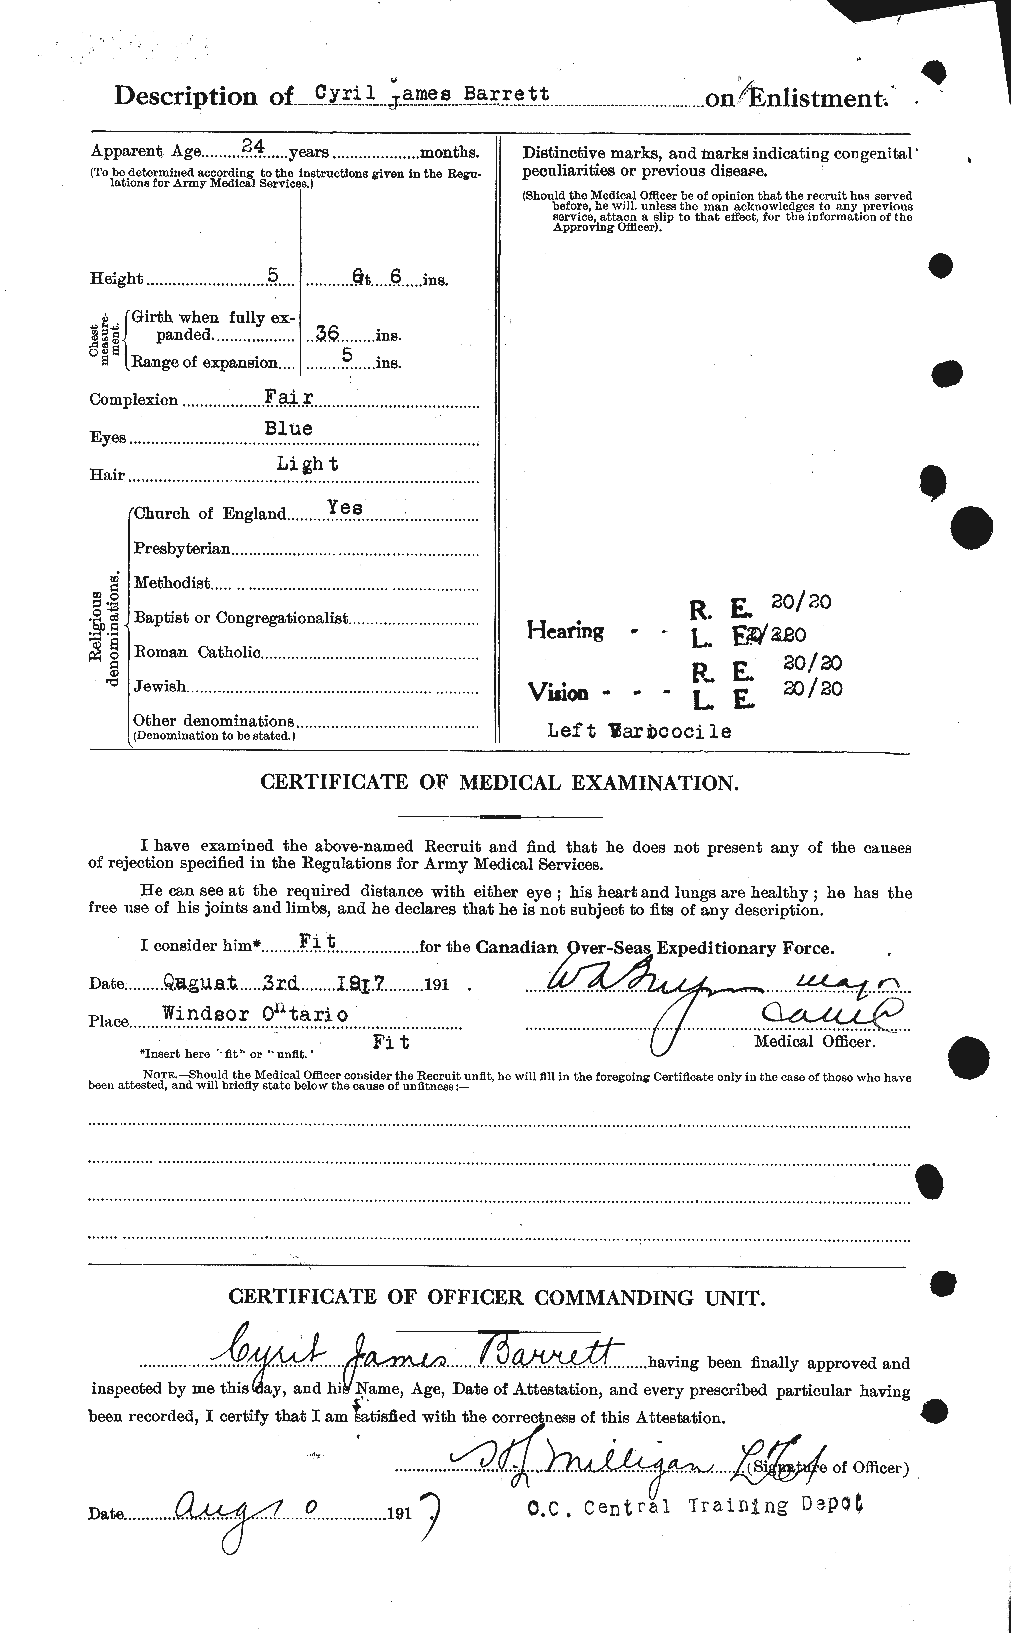 Personnel Records of the First World War - CEF 220366b